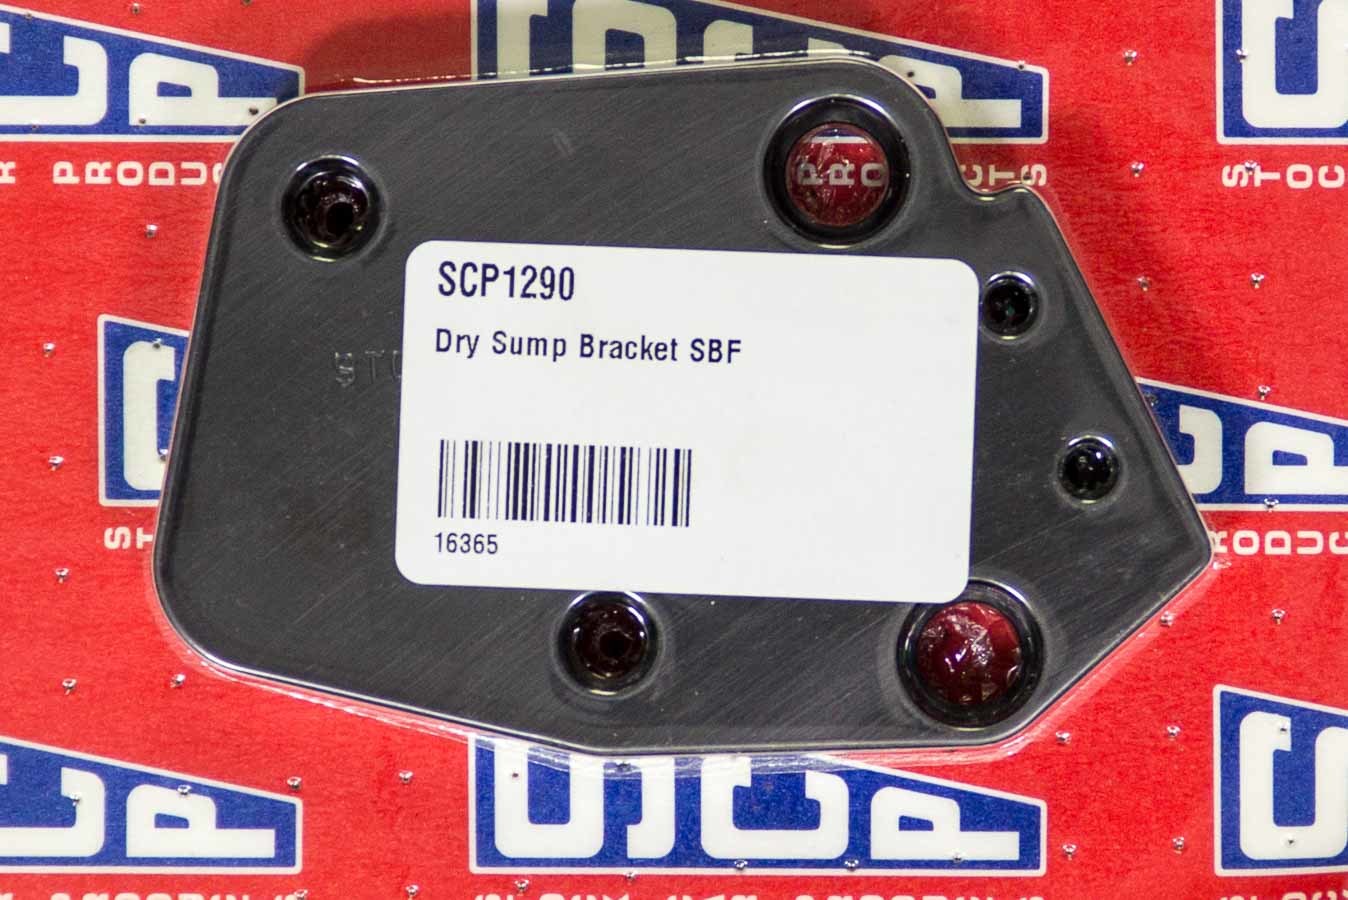 Stock Car Products 1290 - Dry Sump Bracket SBF 